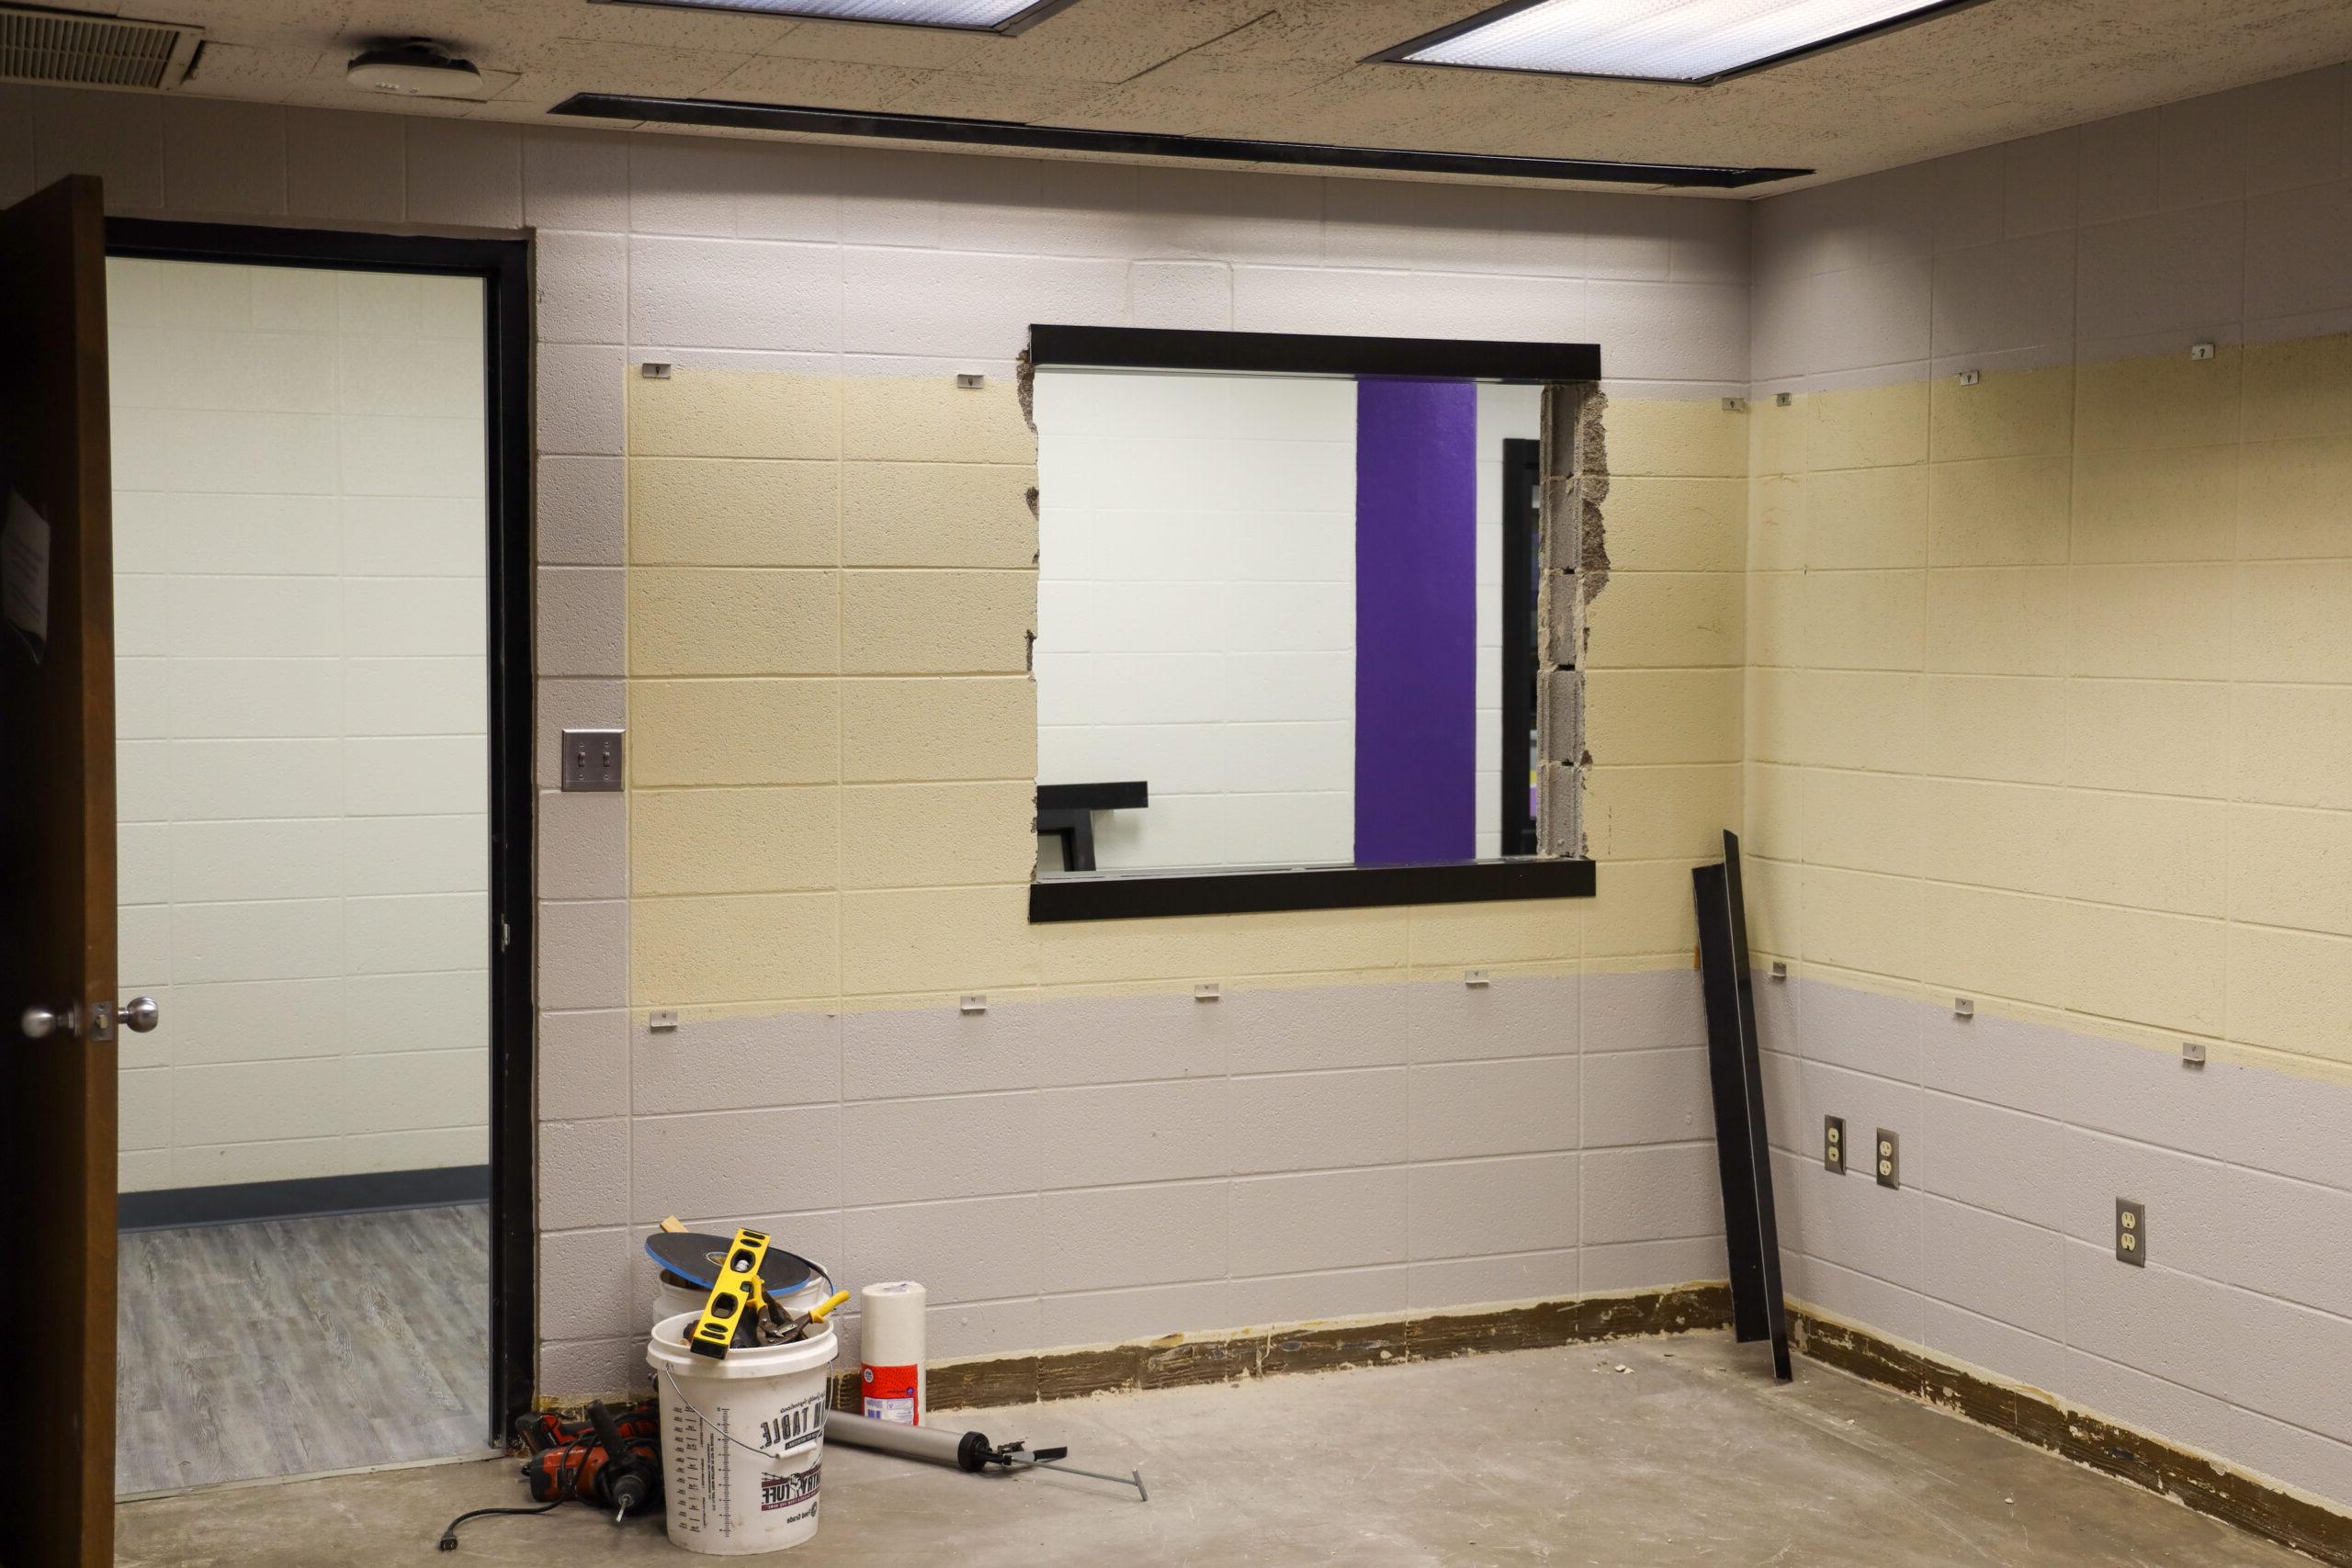 Looking inside out Criminal Justice classroom